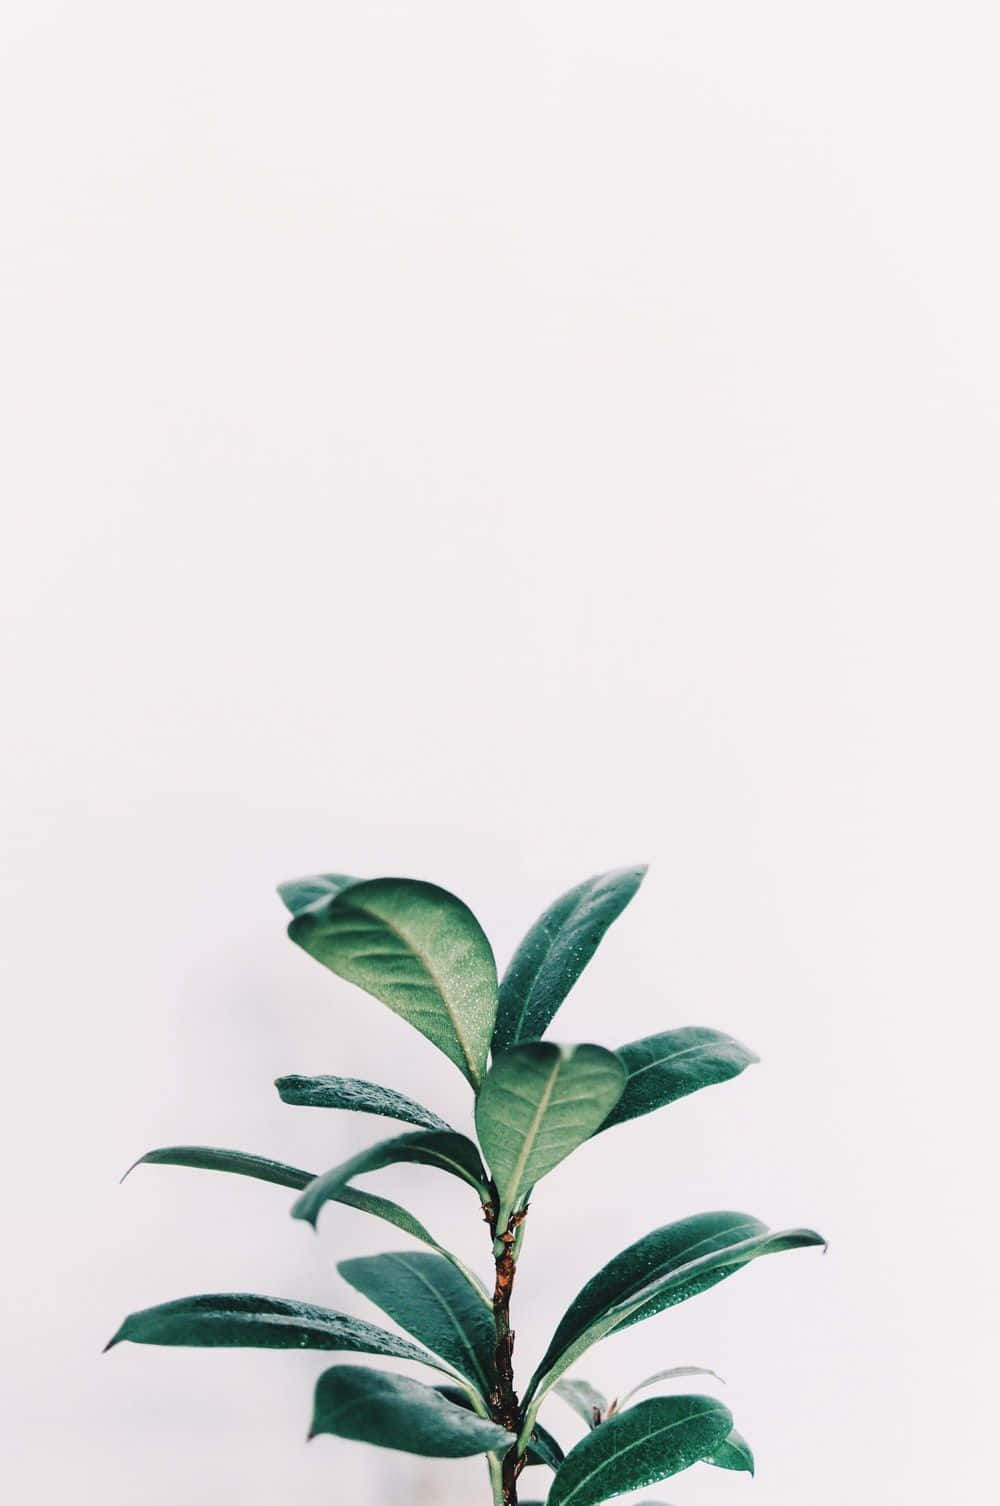 Vintage Aesthetic Plant - The Beauty of Nature in the Past Wallpaper